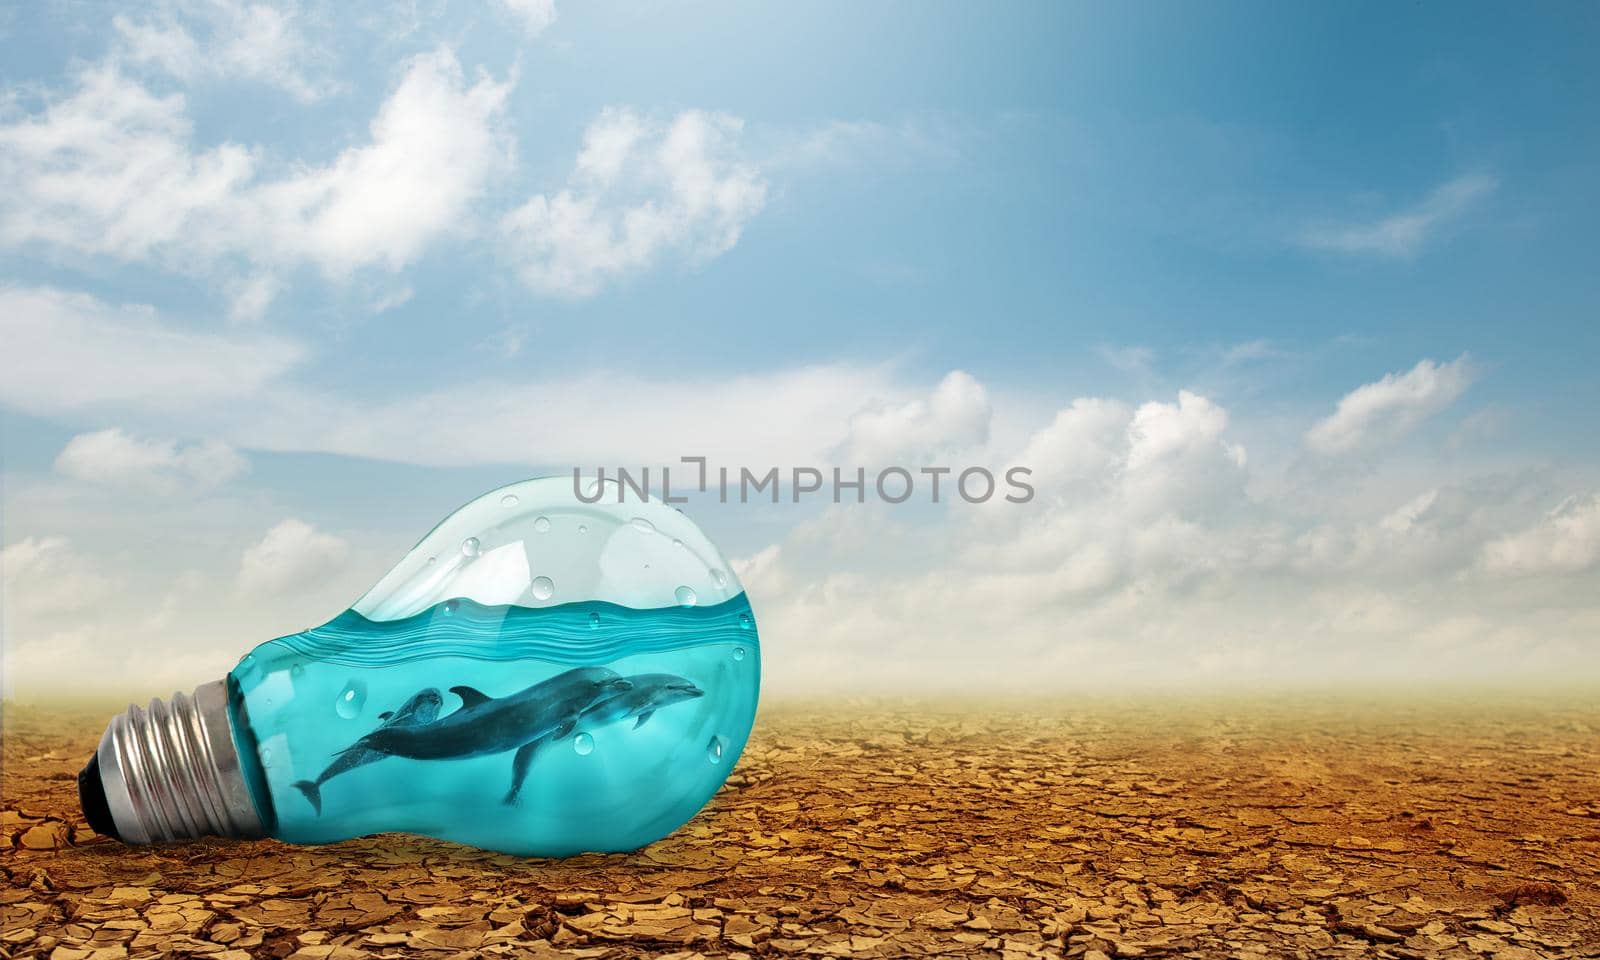 Light bulb with Dolphins swimming inside oncracked earth. Saving environment and natural conservation concept.